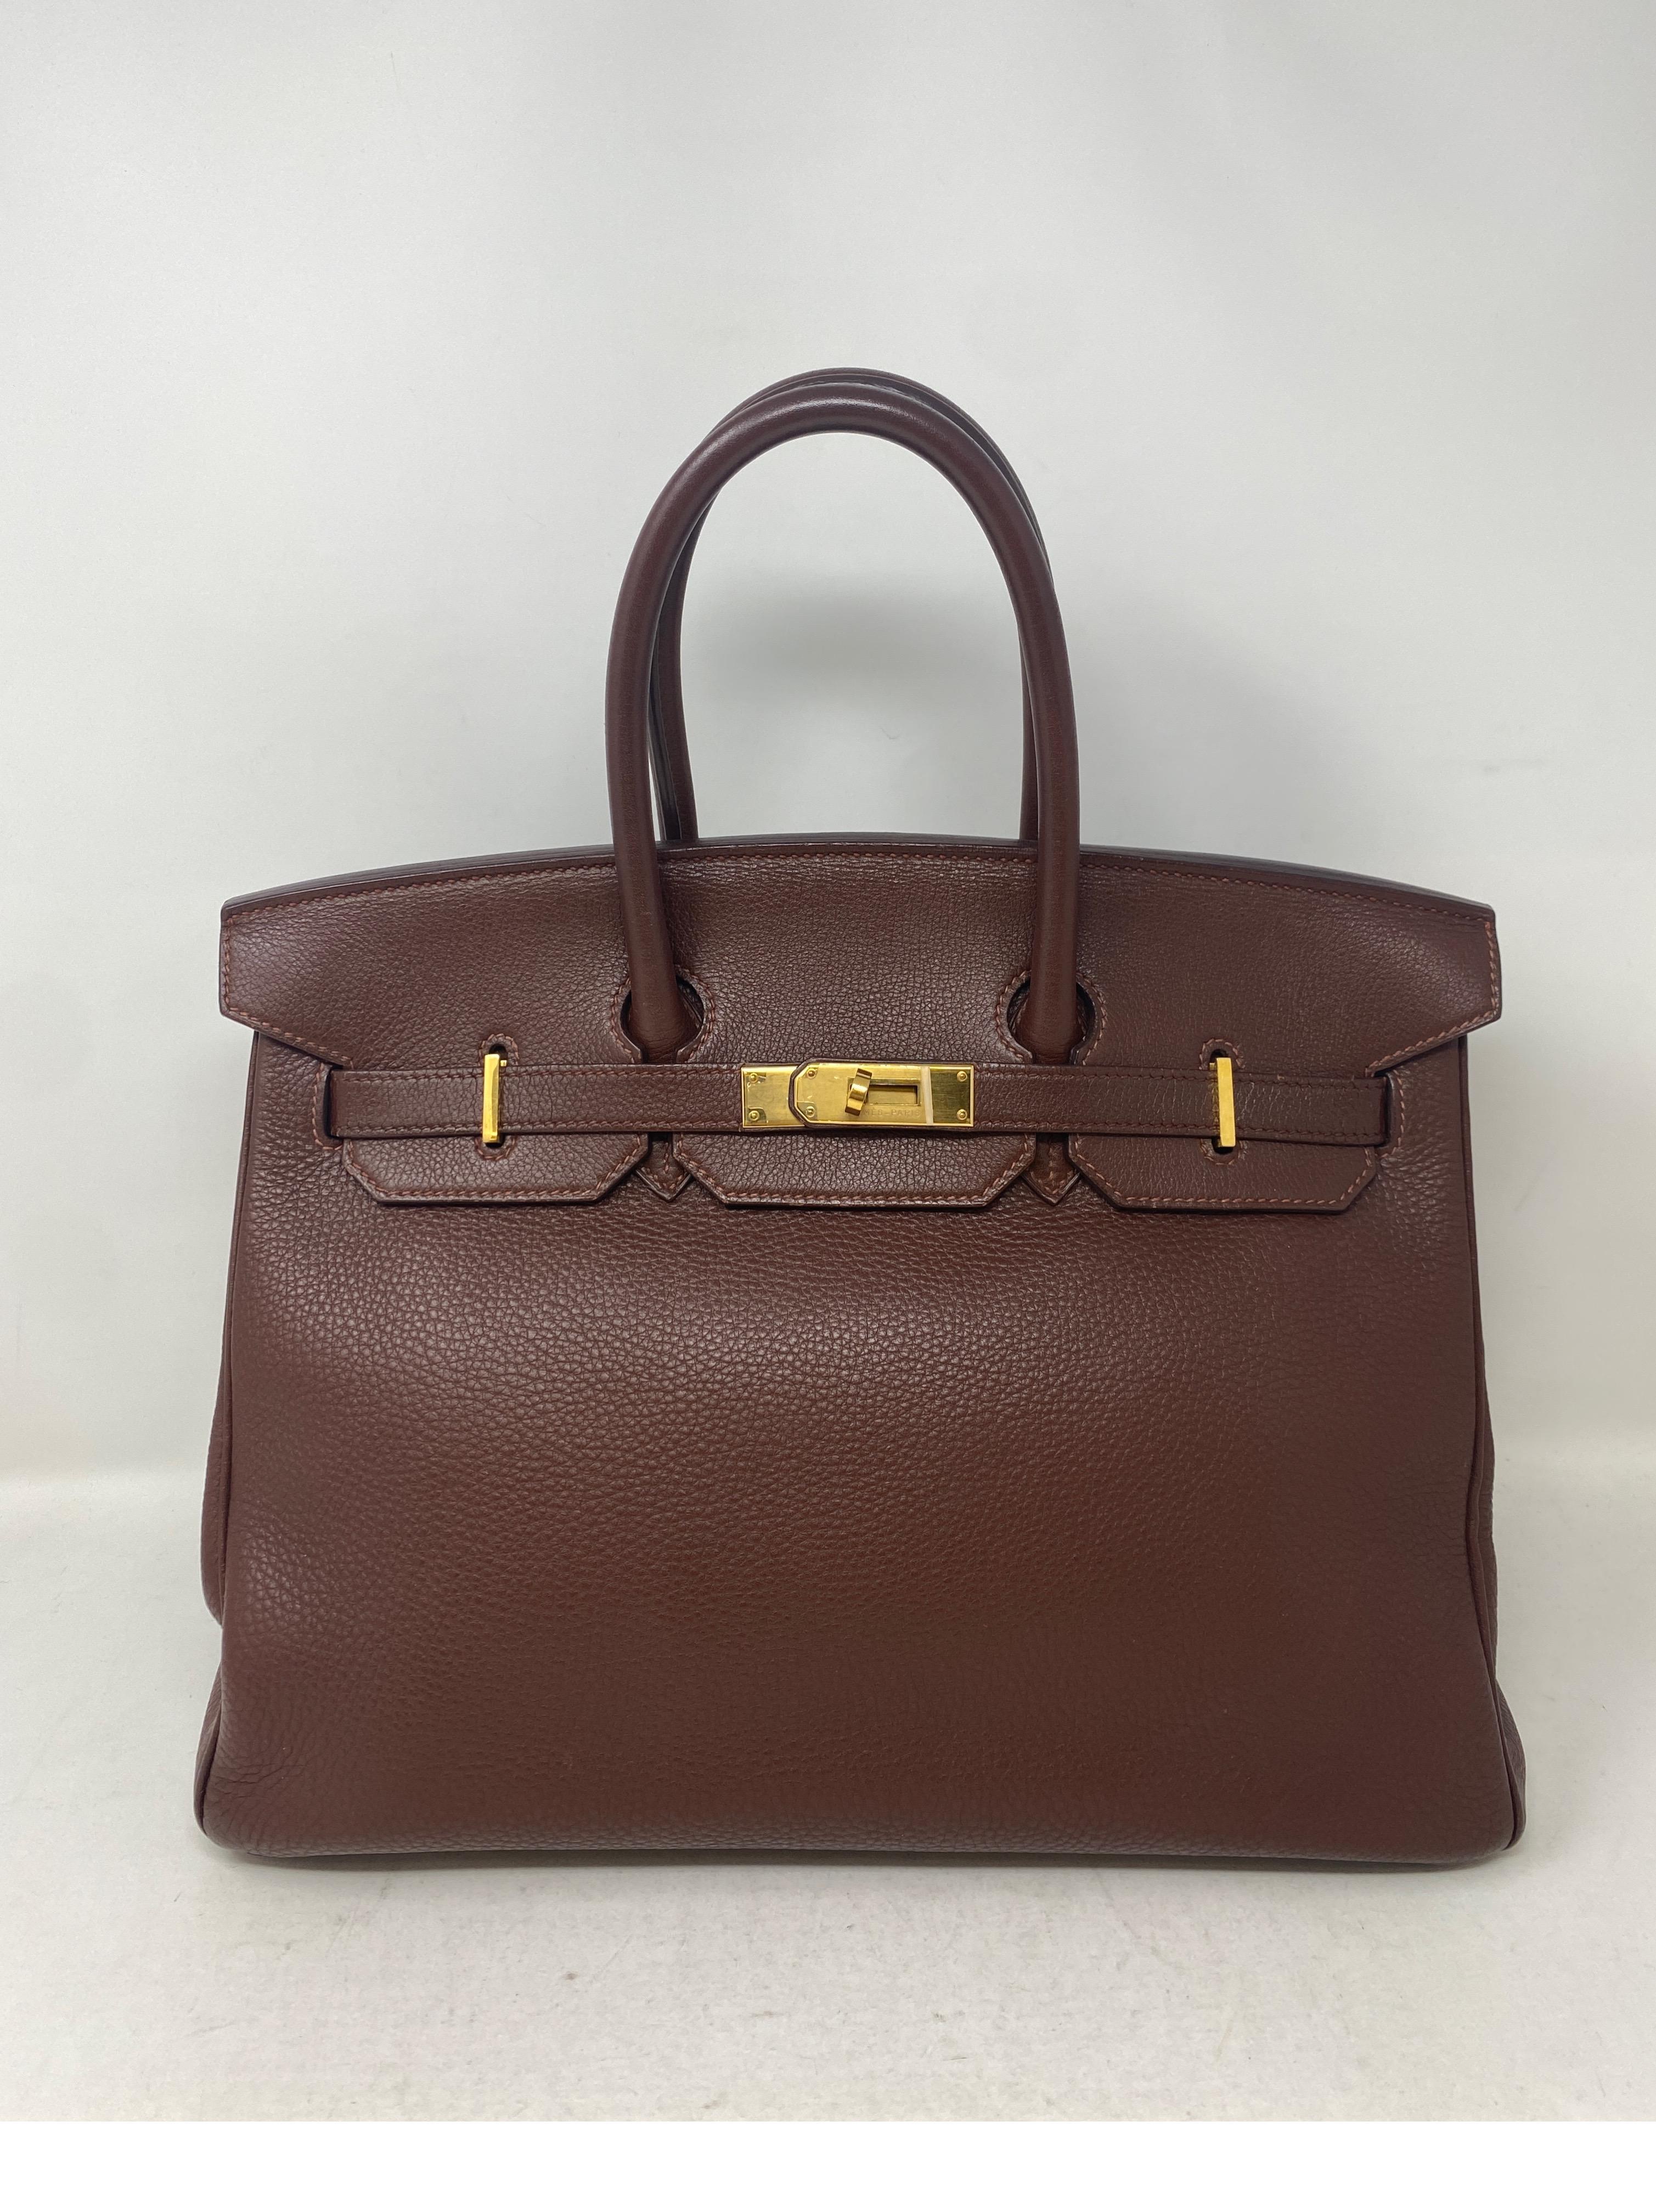 Hermes Birkin Brown 35 Bag. Excellent condition. Nice neutral chocolate brown color. Togo leather. Gold hardware. Great bag priced to sell. Includes clochette, lock, keys, and dust bag. Guaranteed authentic. 